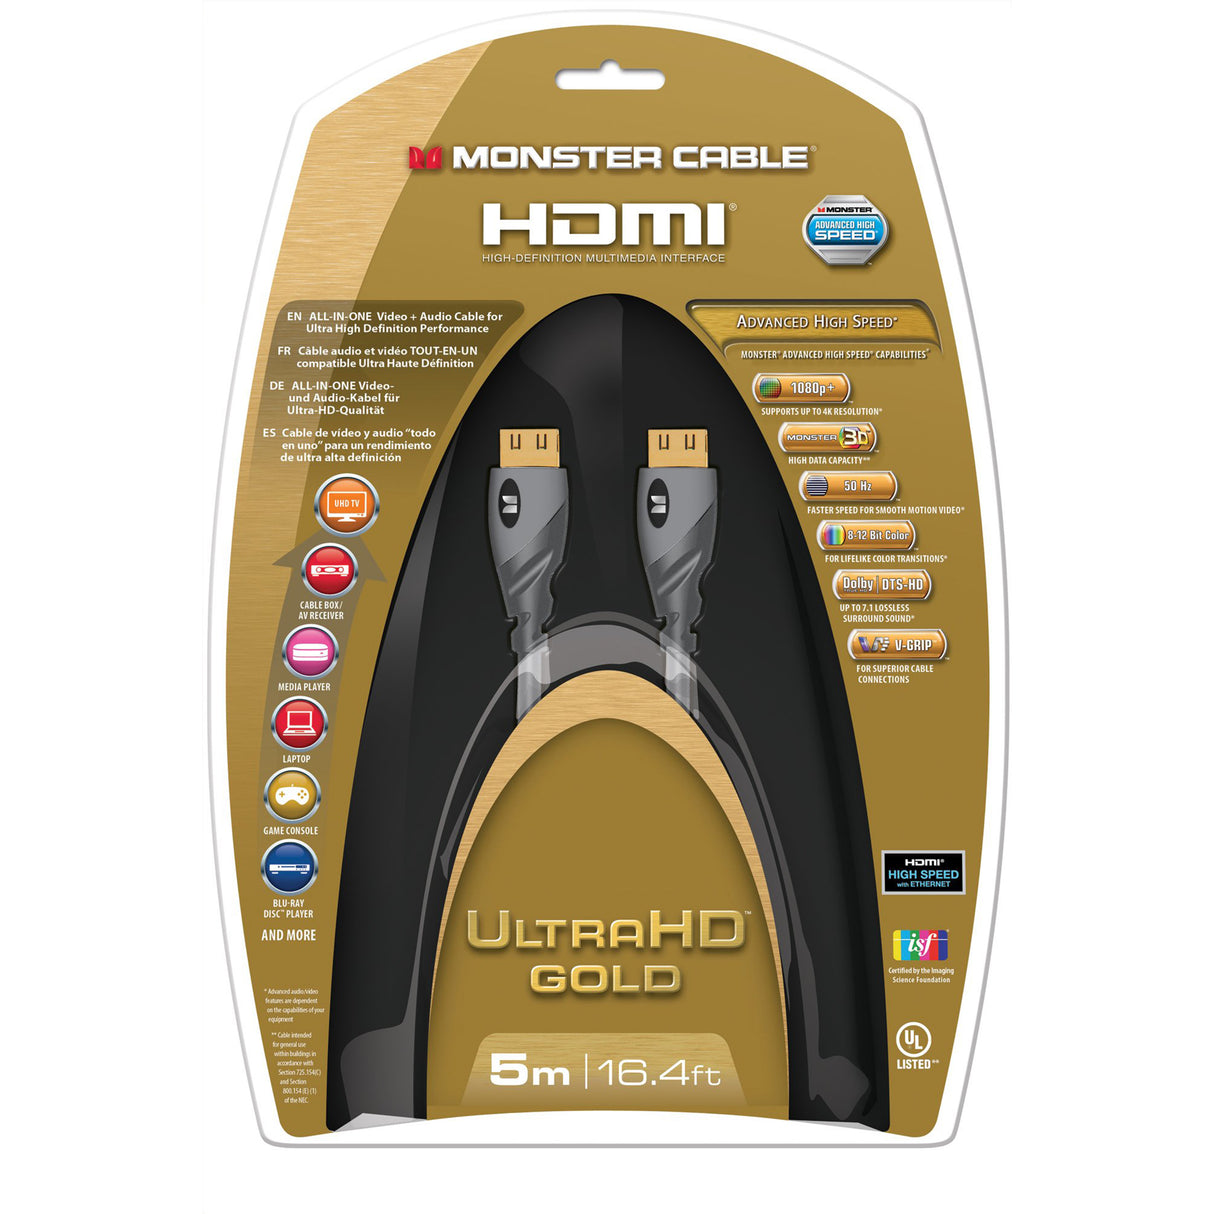 Monster Gold Advanced High Speed HDMI Ethernet Cable (5 Meter)